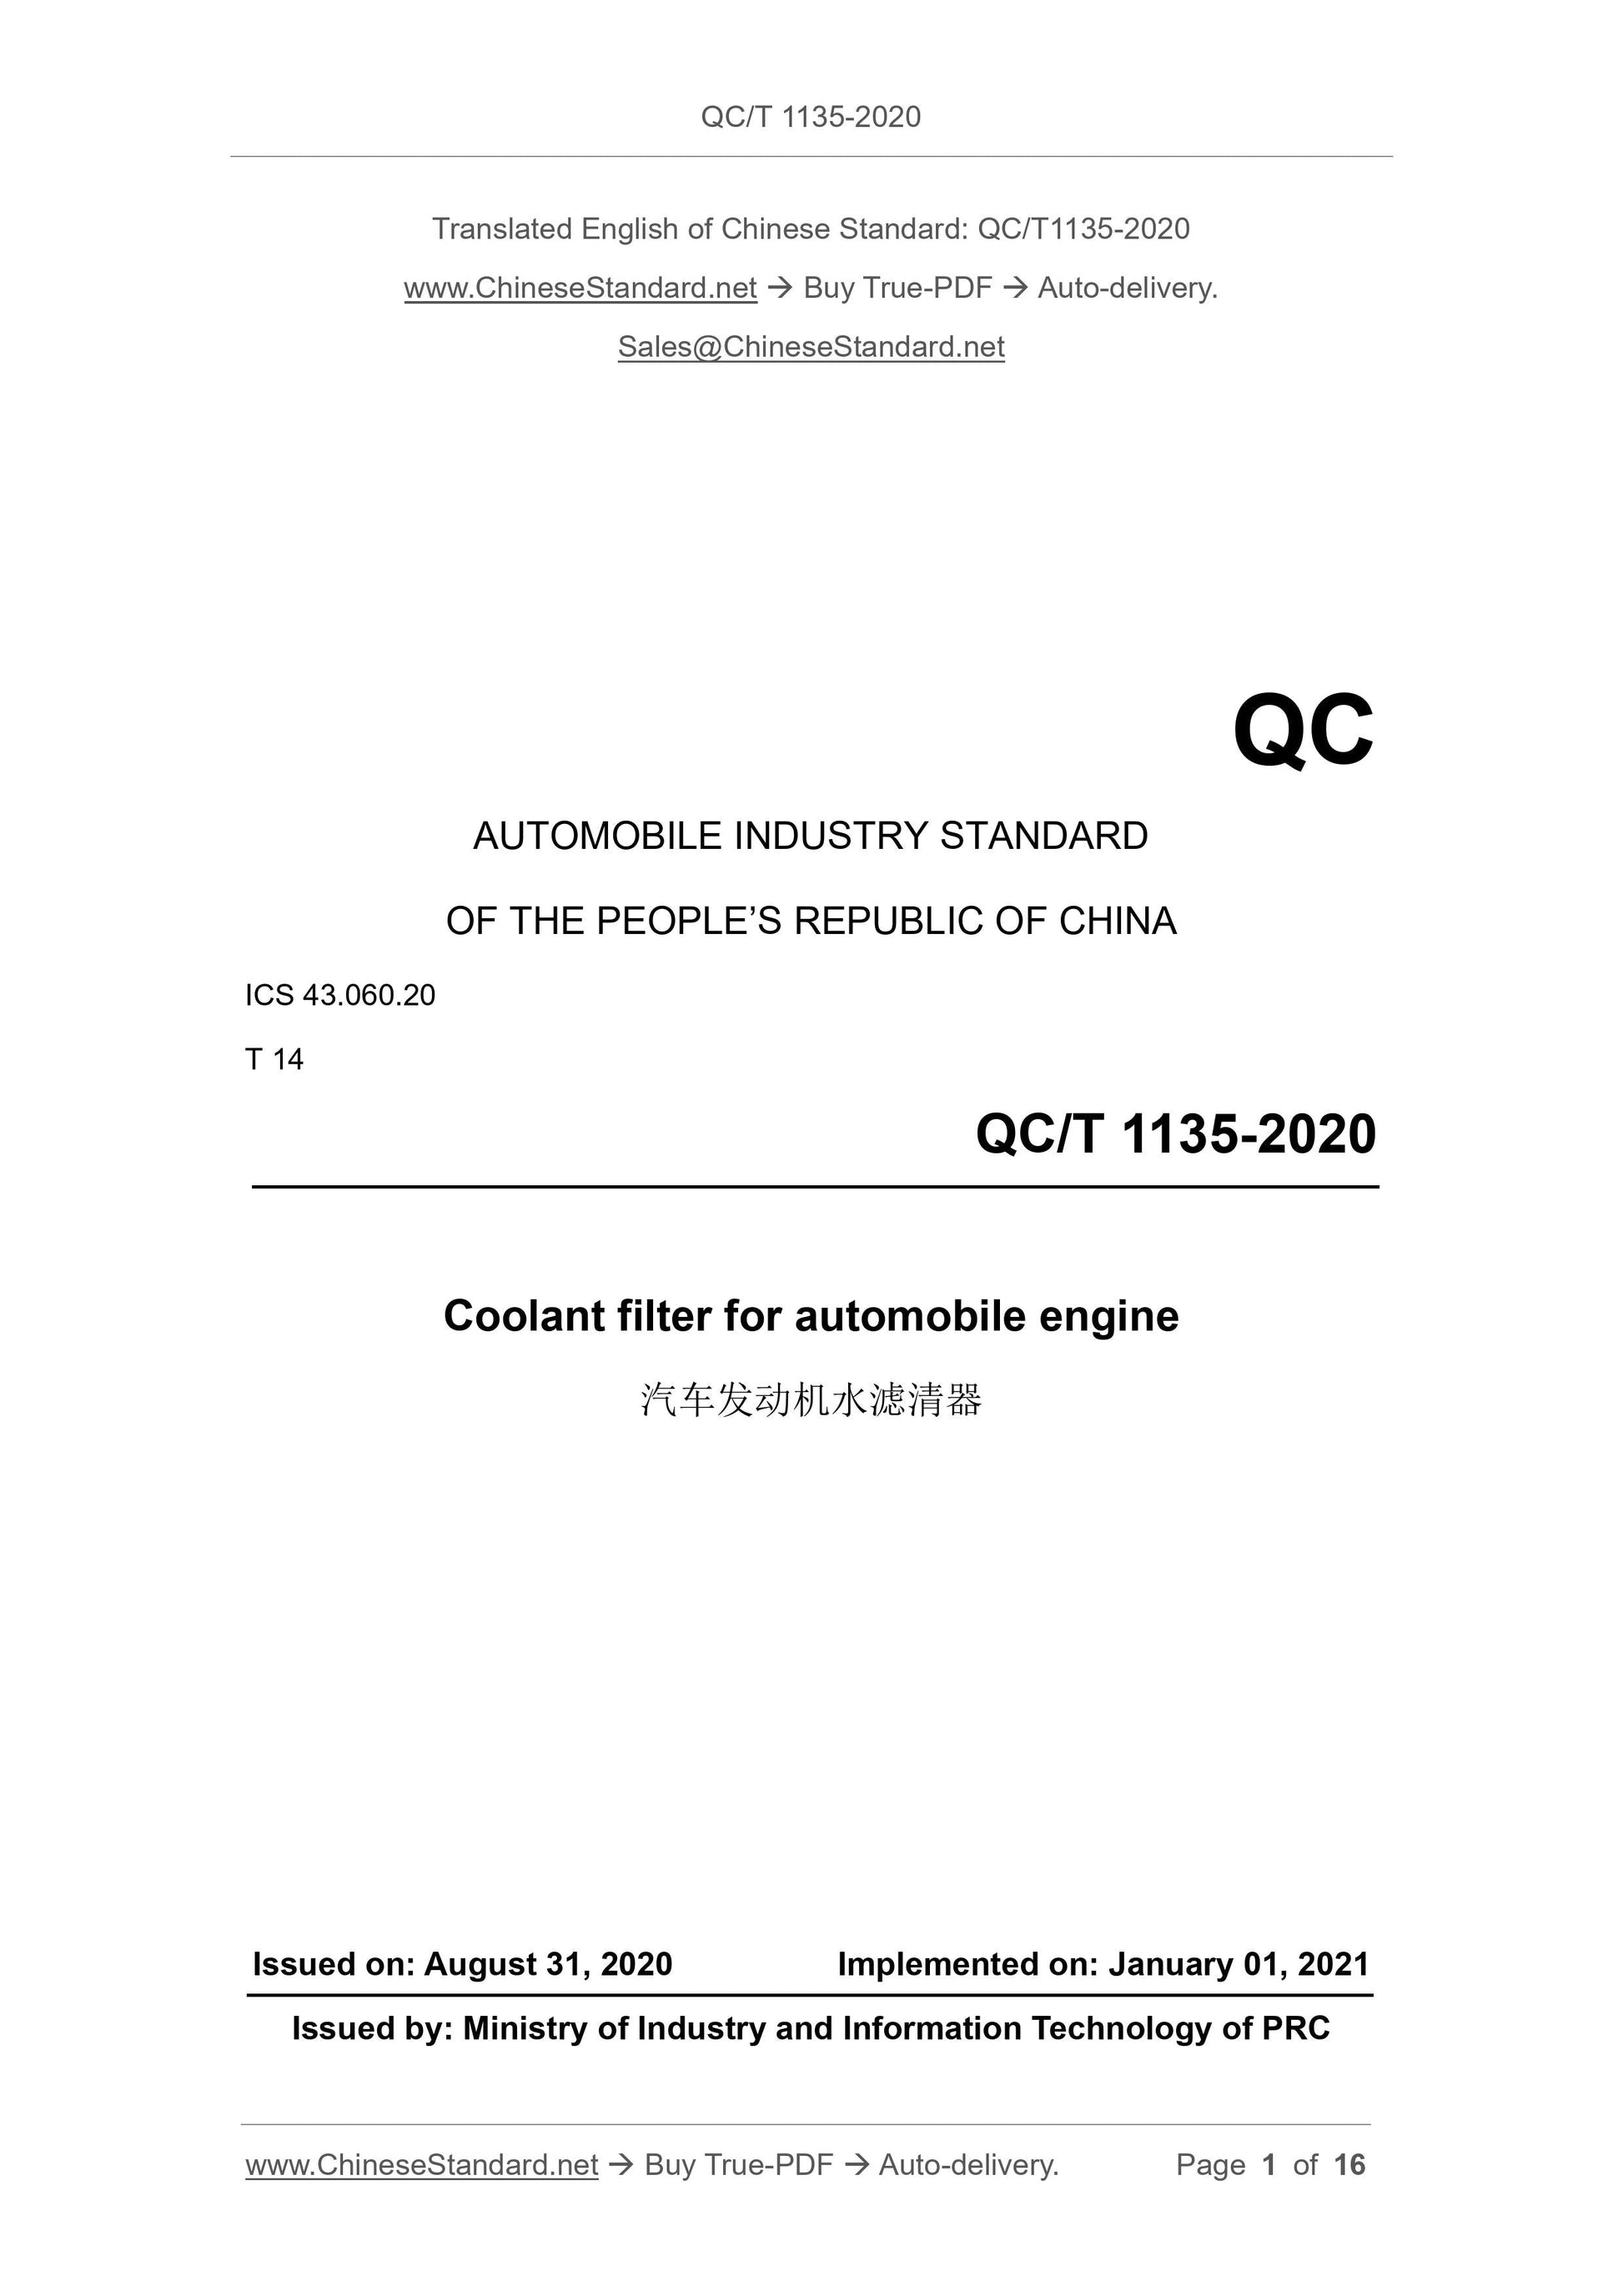 QC/T 1135-2020 Page 1